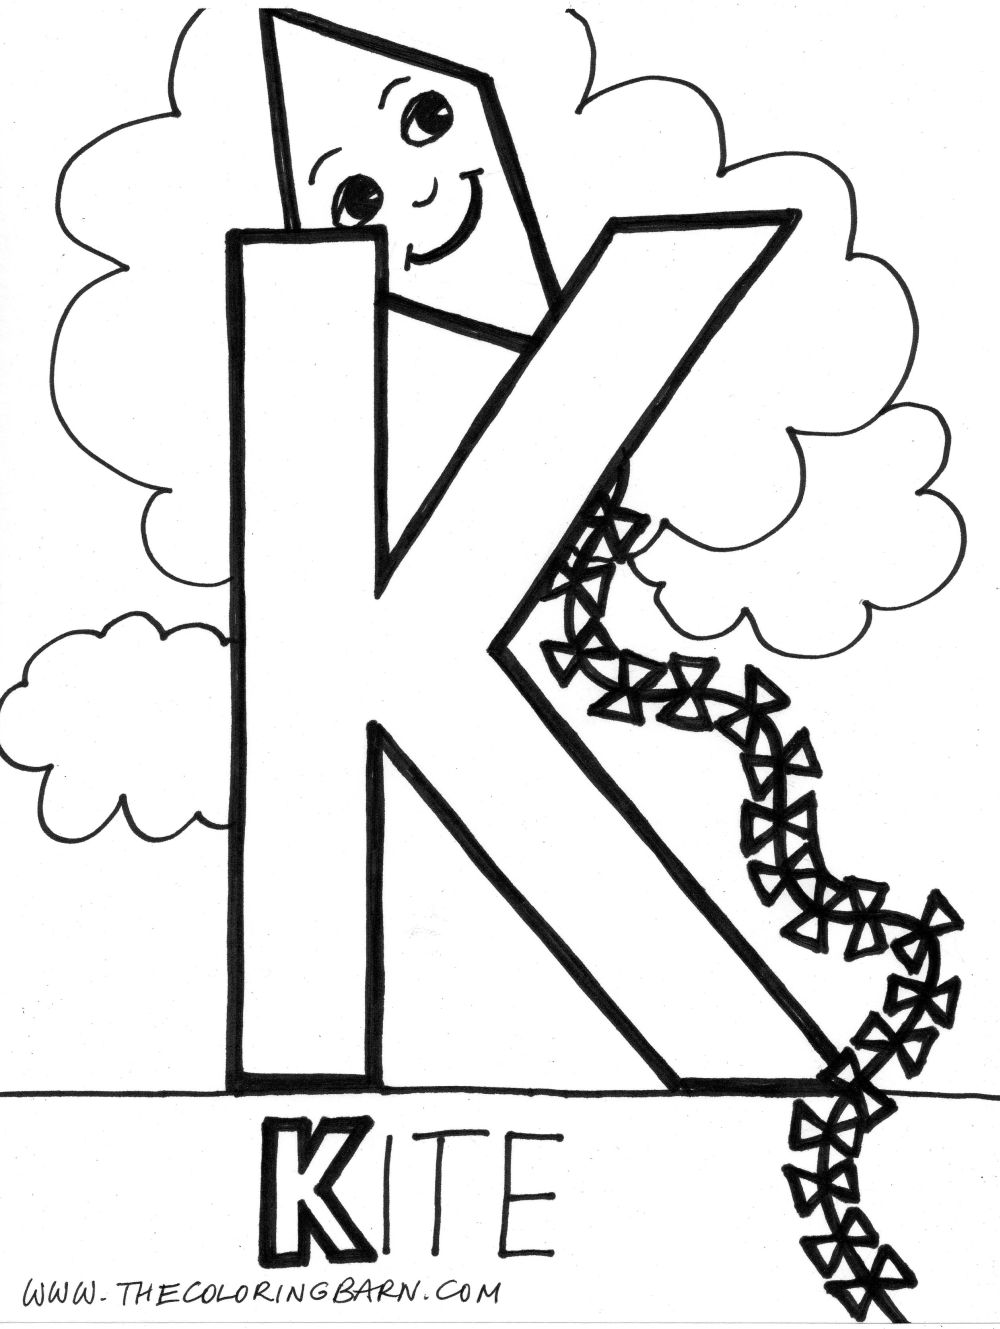 Letter K Coloring Pages | Only Coloring Pages - Coloring Home